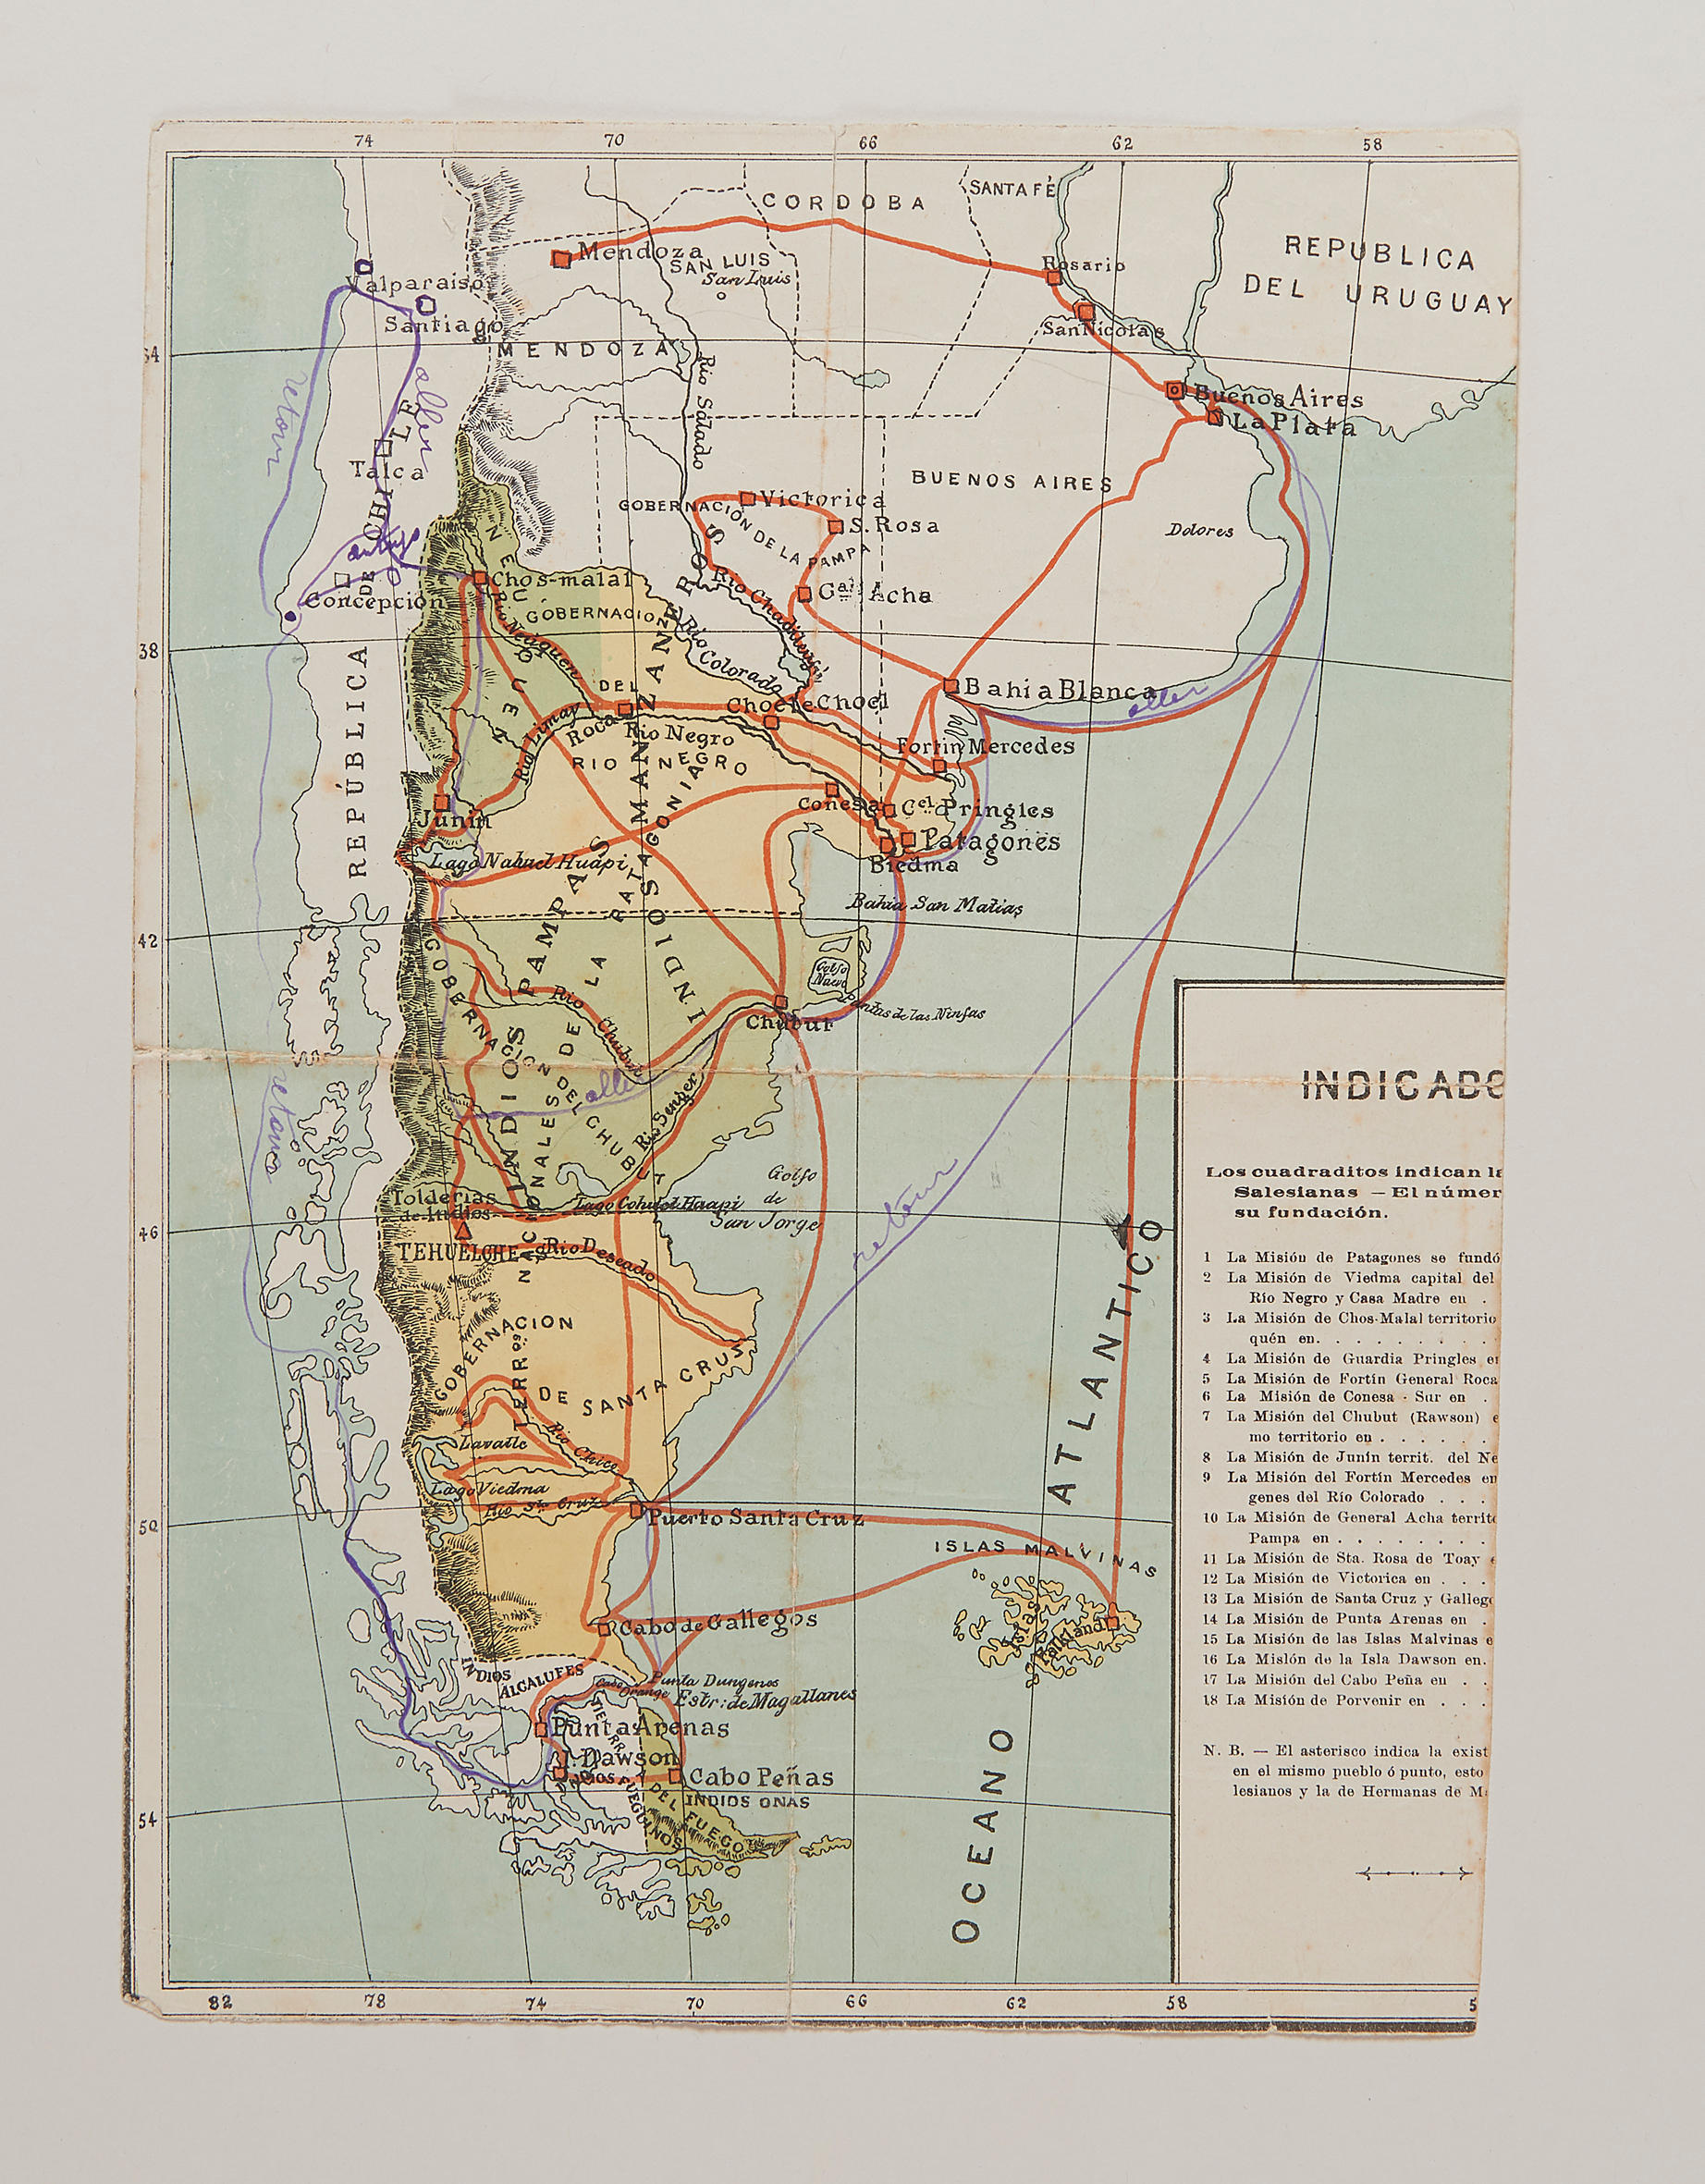 A map of Uruguay and the atlantic ocean.